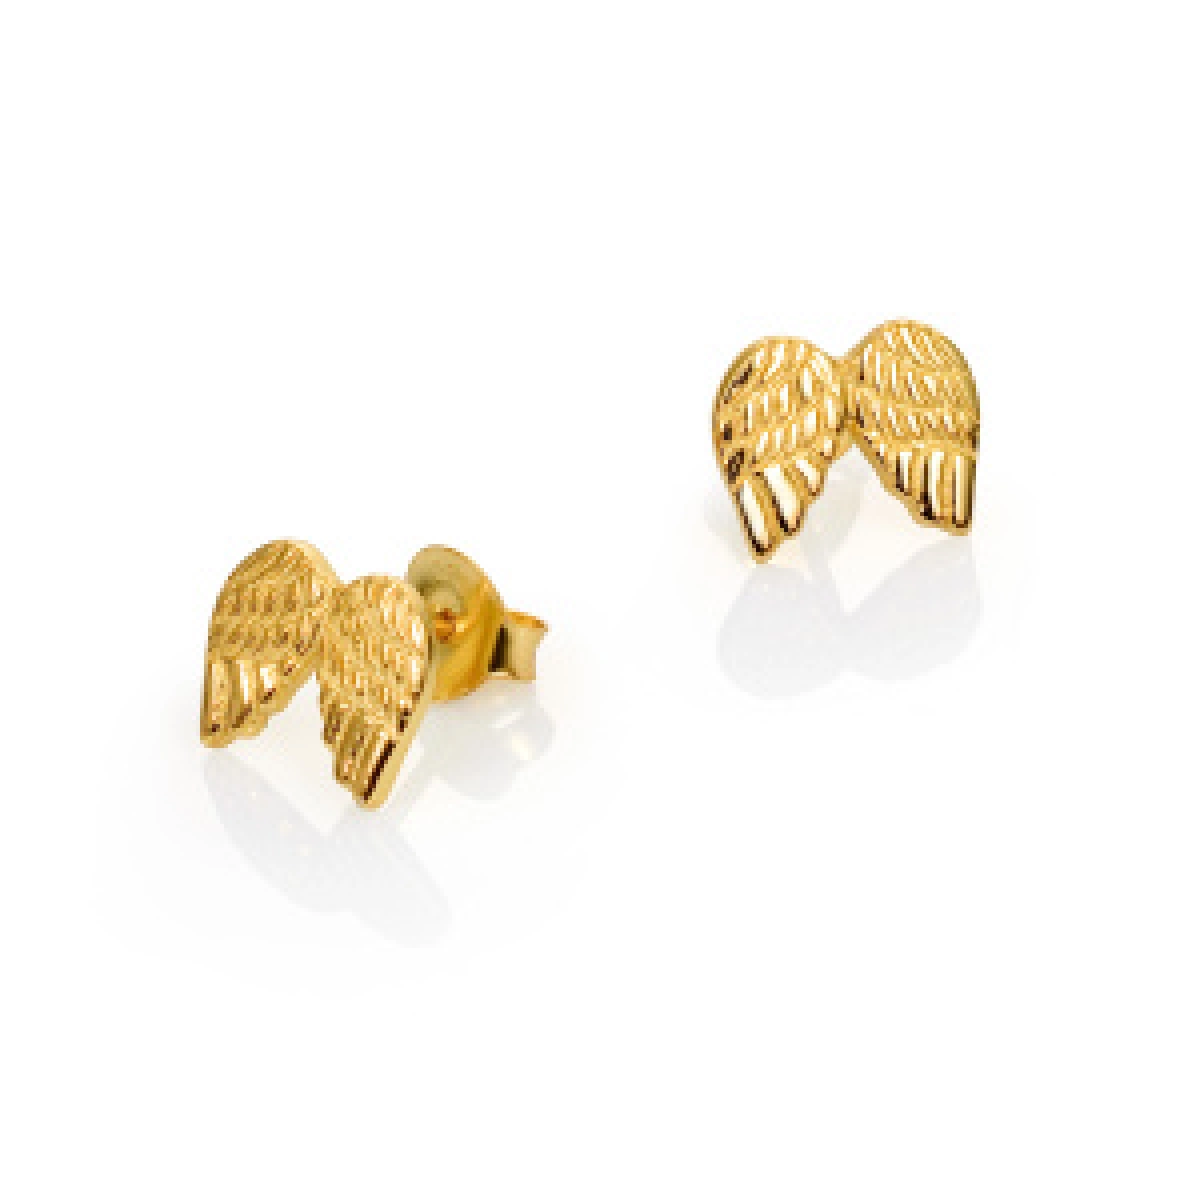 EARRINGS PLATED GOLD SRA JEWELS VICEROY 4034E000-00